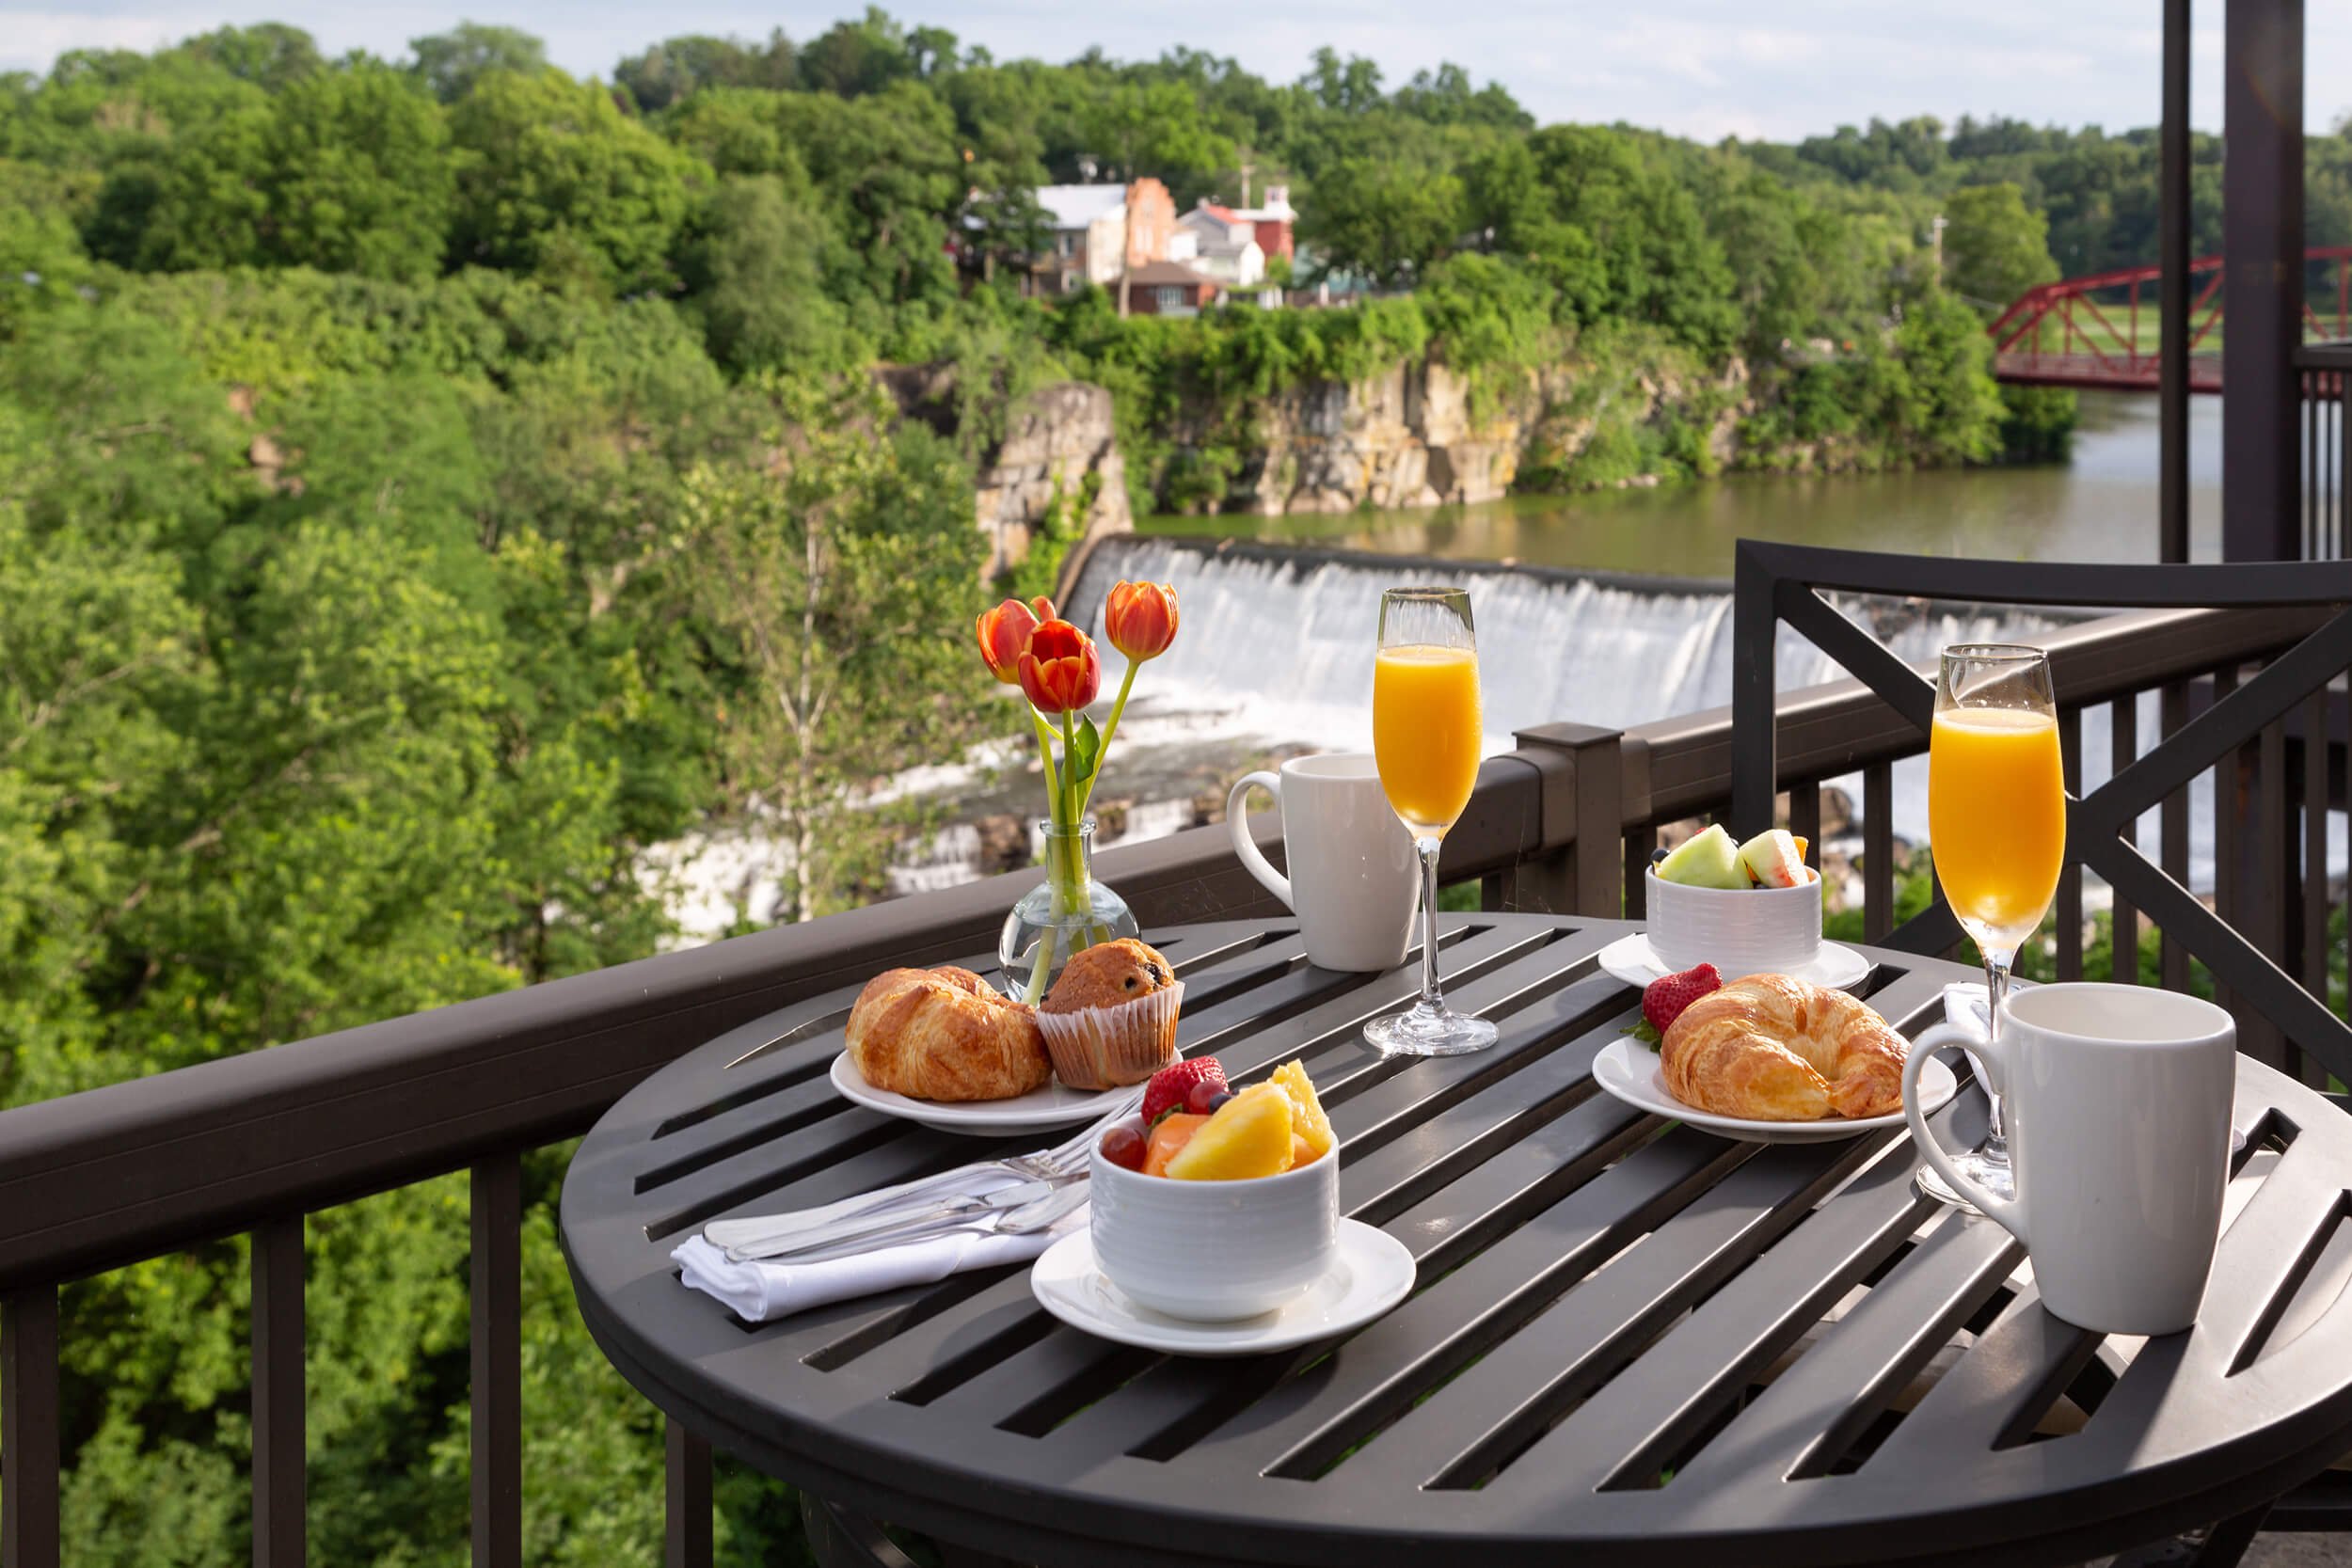 Breakfast on the balcony overlooking the Esopus Waterfall in the Tower Suite at Diamond Mills hotel in Saugerties, NY